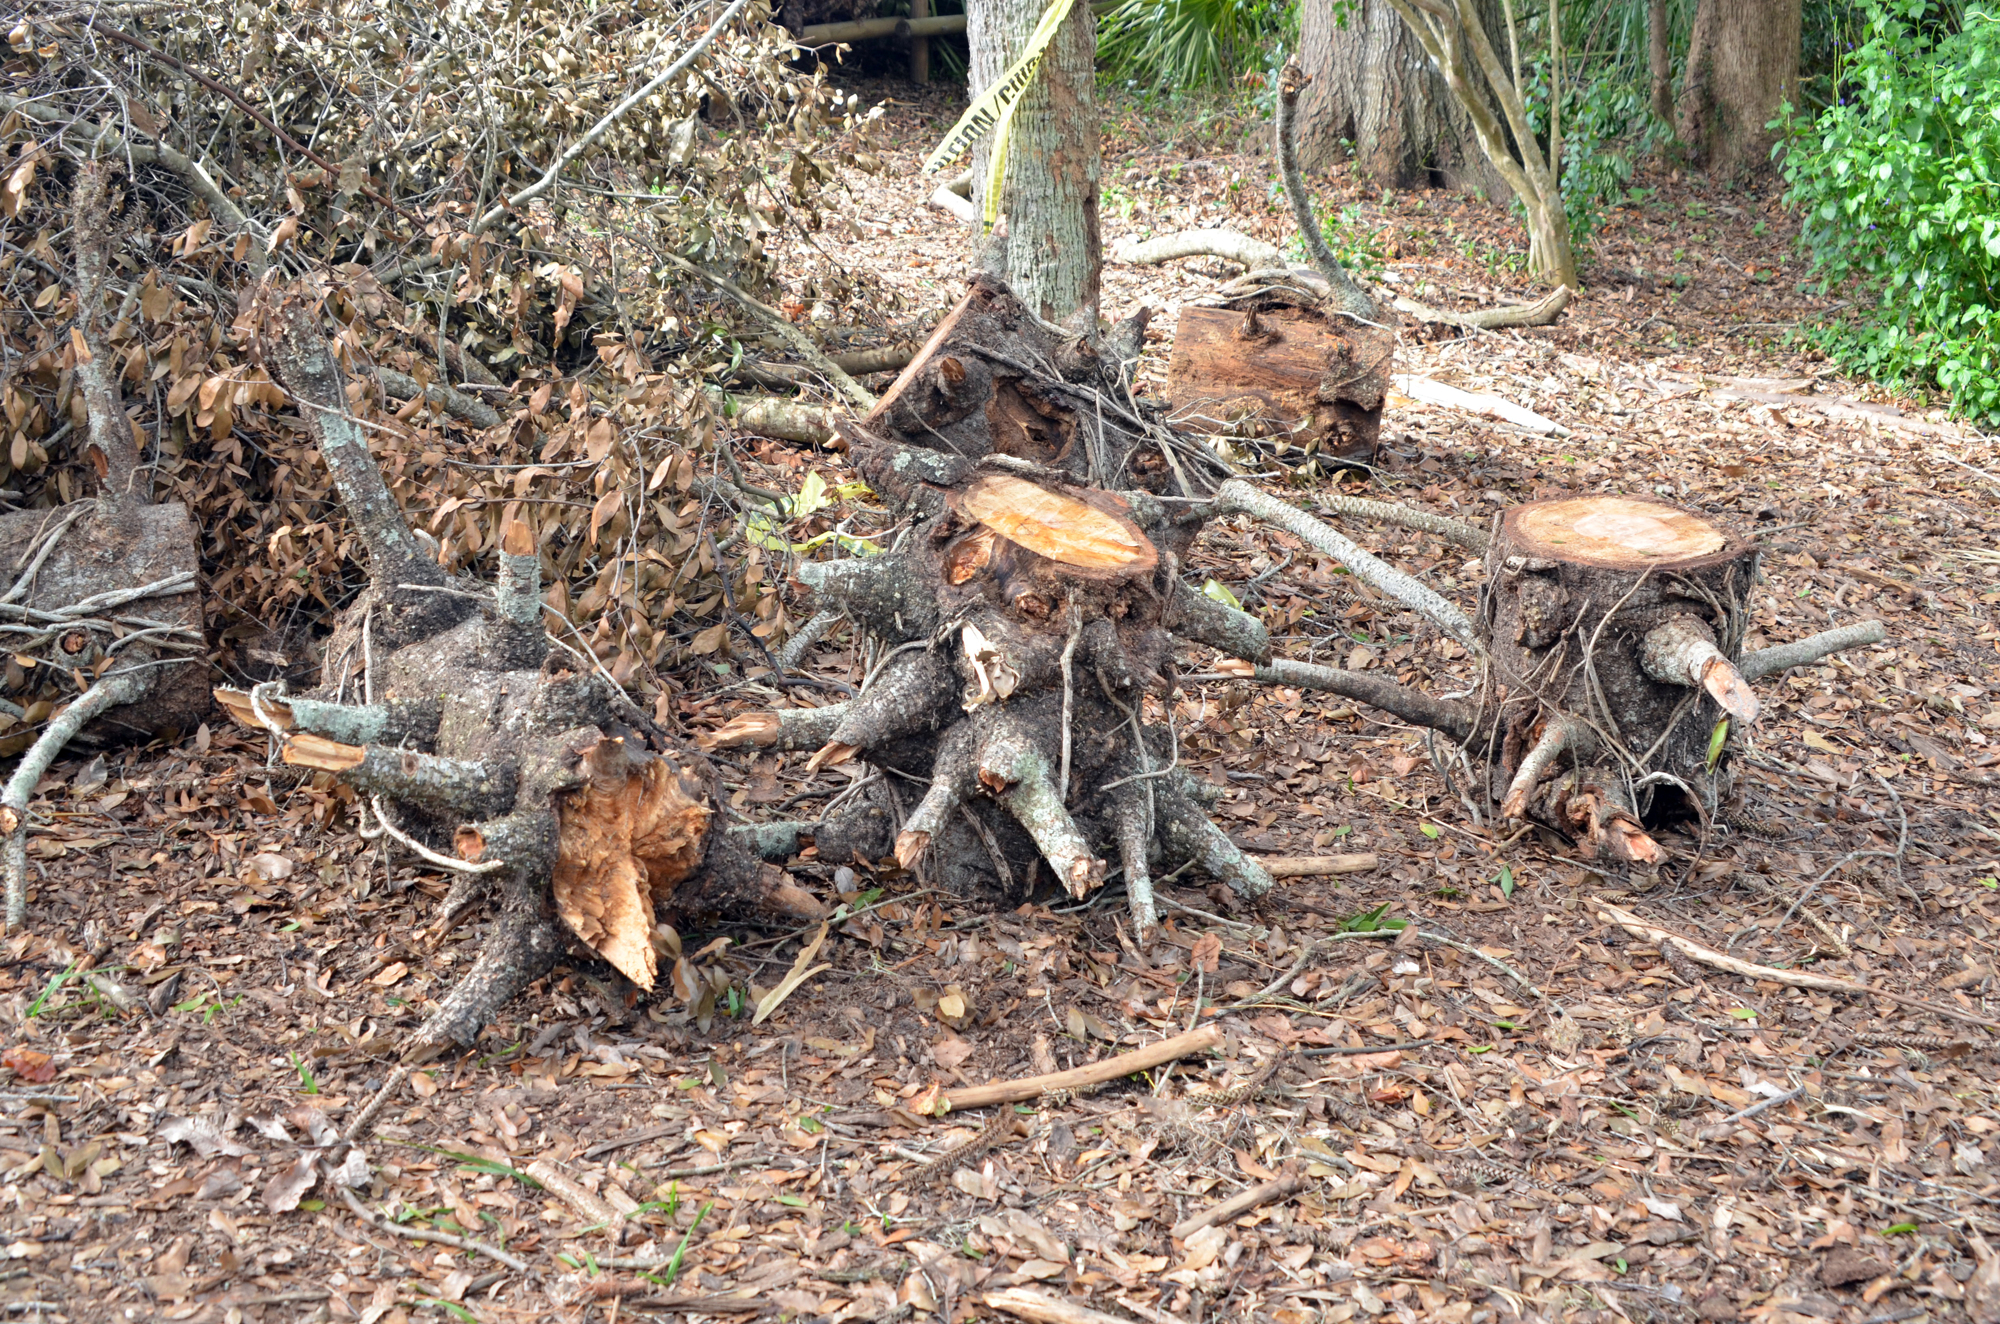 Pieces from the top of the Bunya pine lie near roadside rubbish waiting to be hauled away.